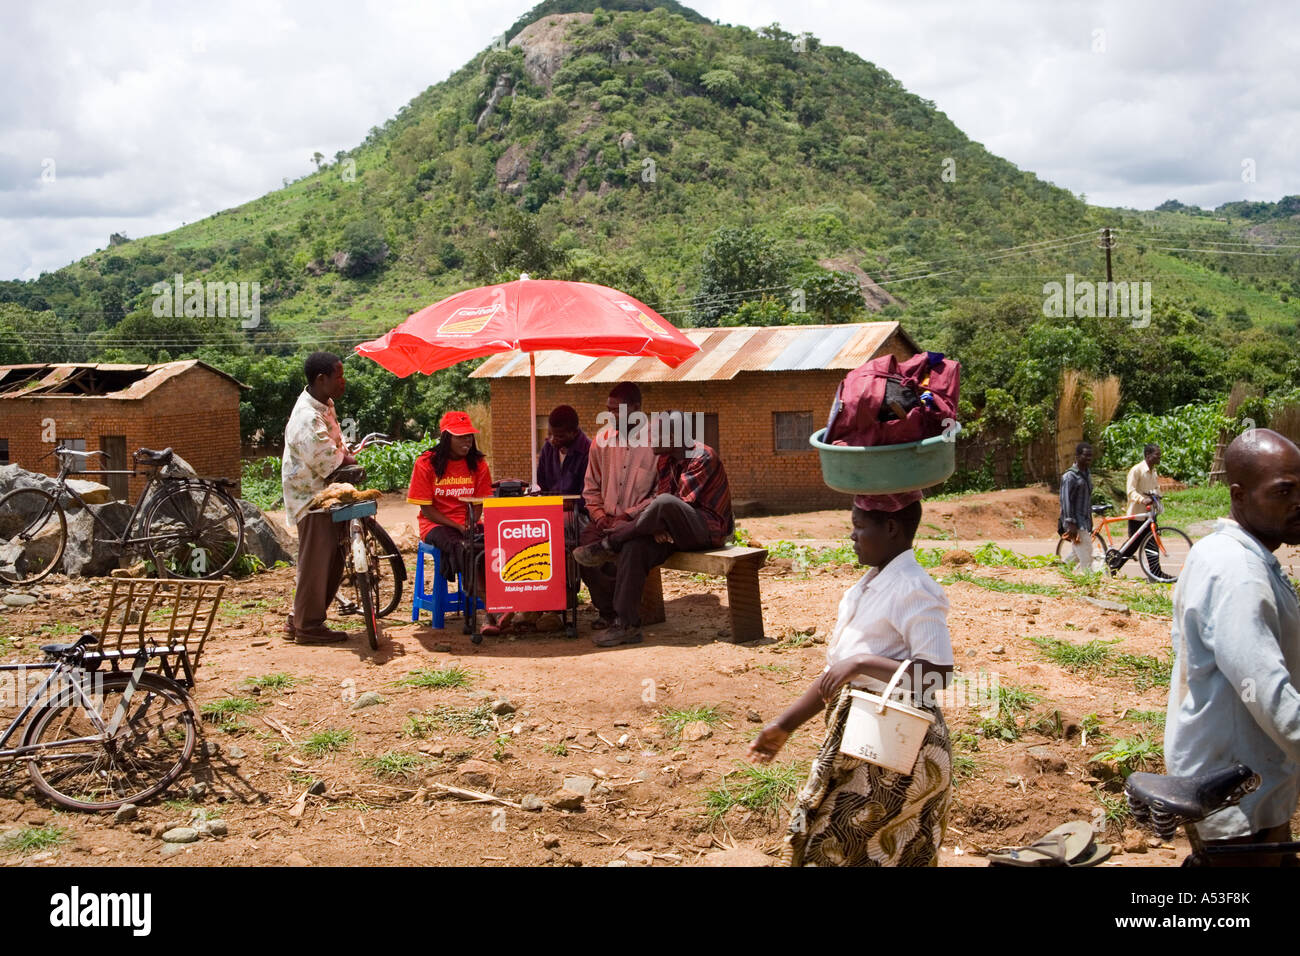 Telephone booth at the Saturday market in the village of Nkhoma Malawi Africa Stock Photo